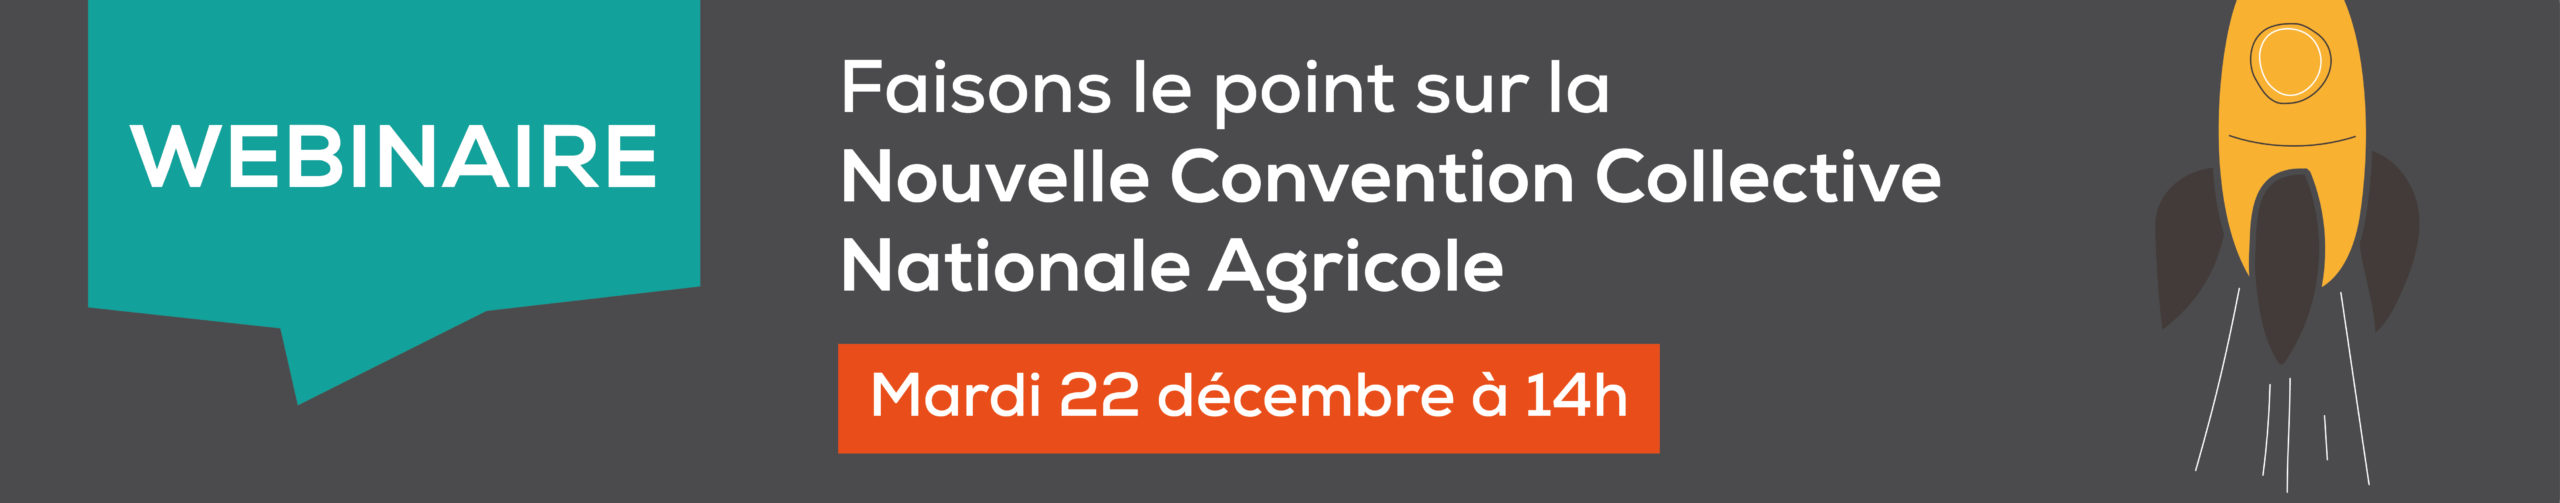 2020-Webinaire-convention-collective-agricole